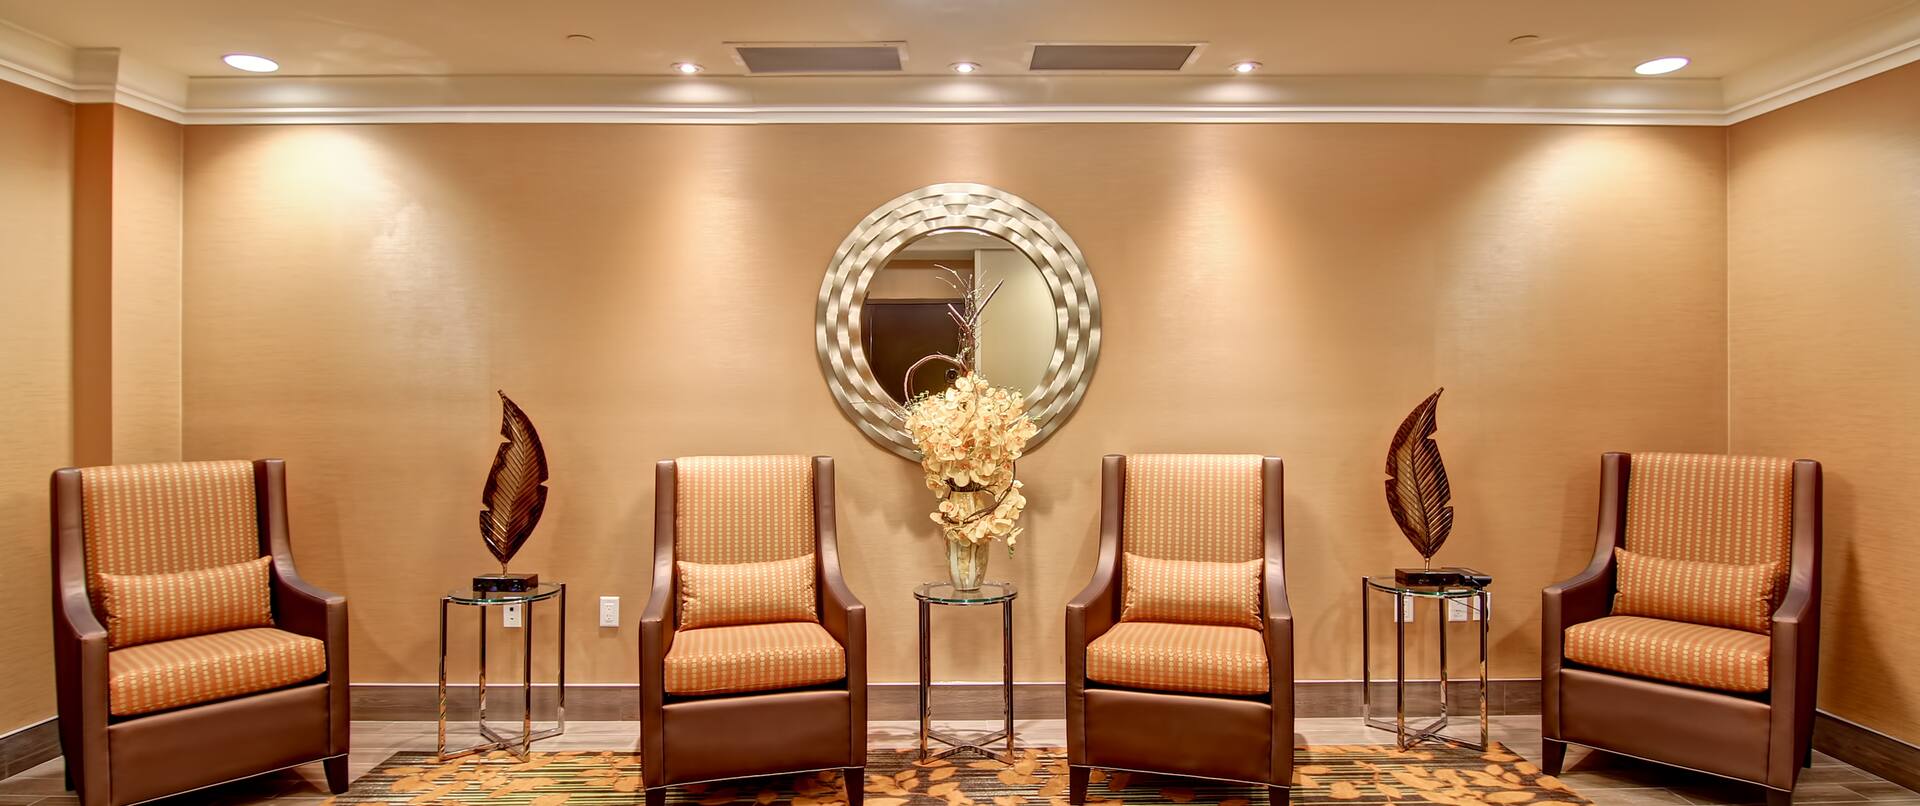 Four Armchairs and Three Tables in a Room With Round Wall Mirror